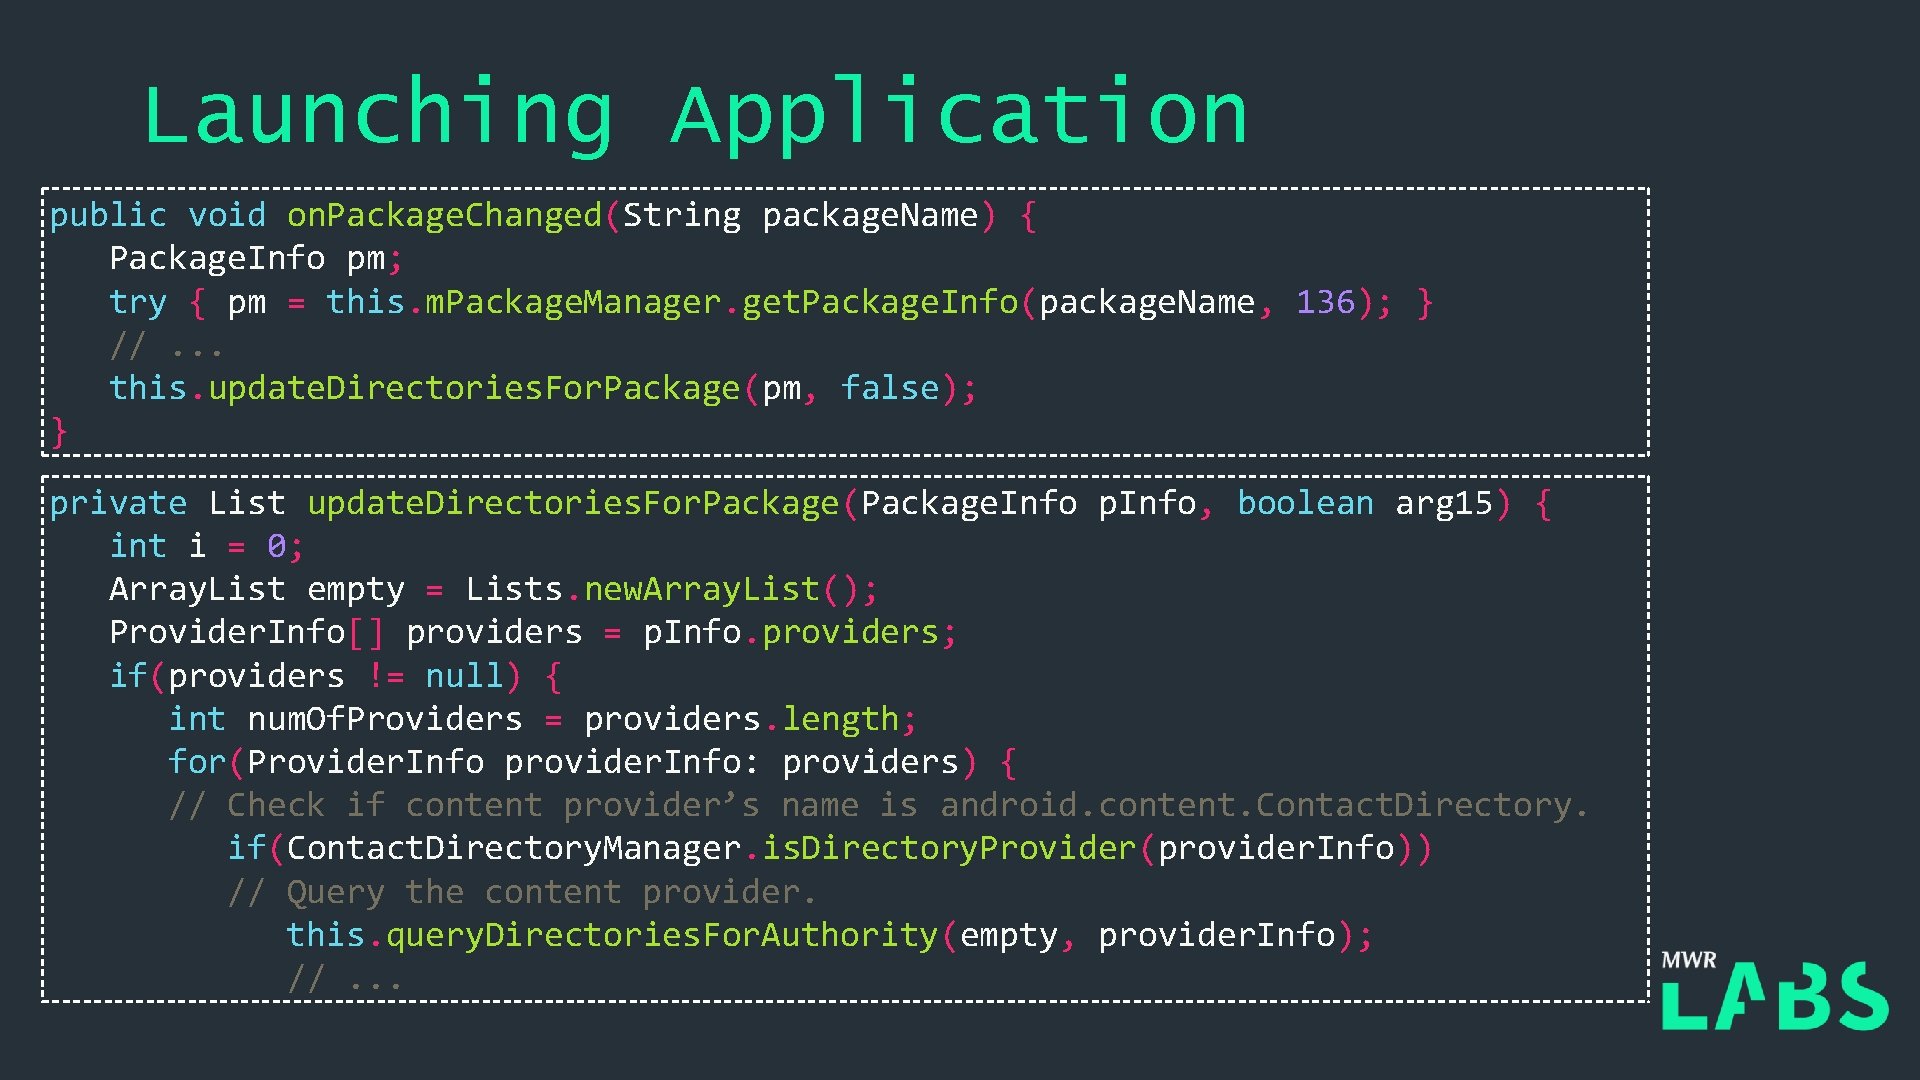 Launching Application public void on. Package. Changed(String package. Name) { Package. Info pm; try